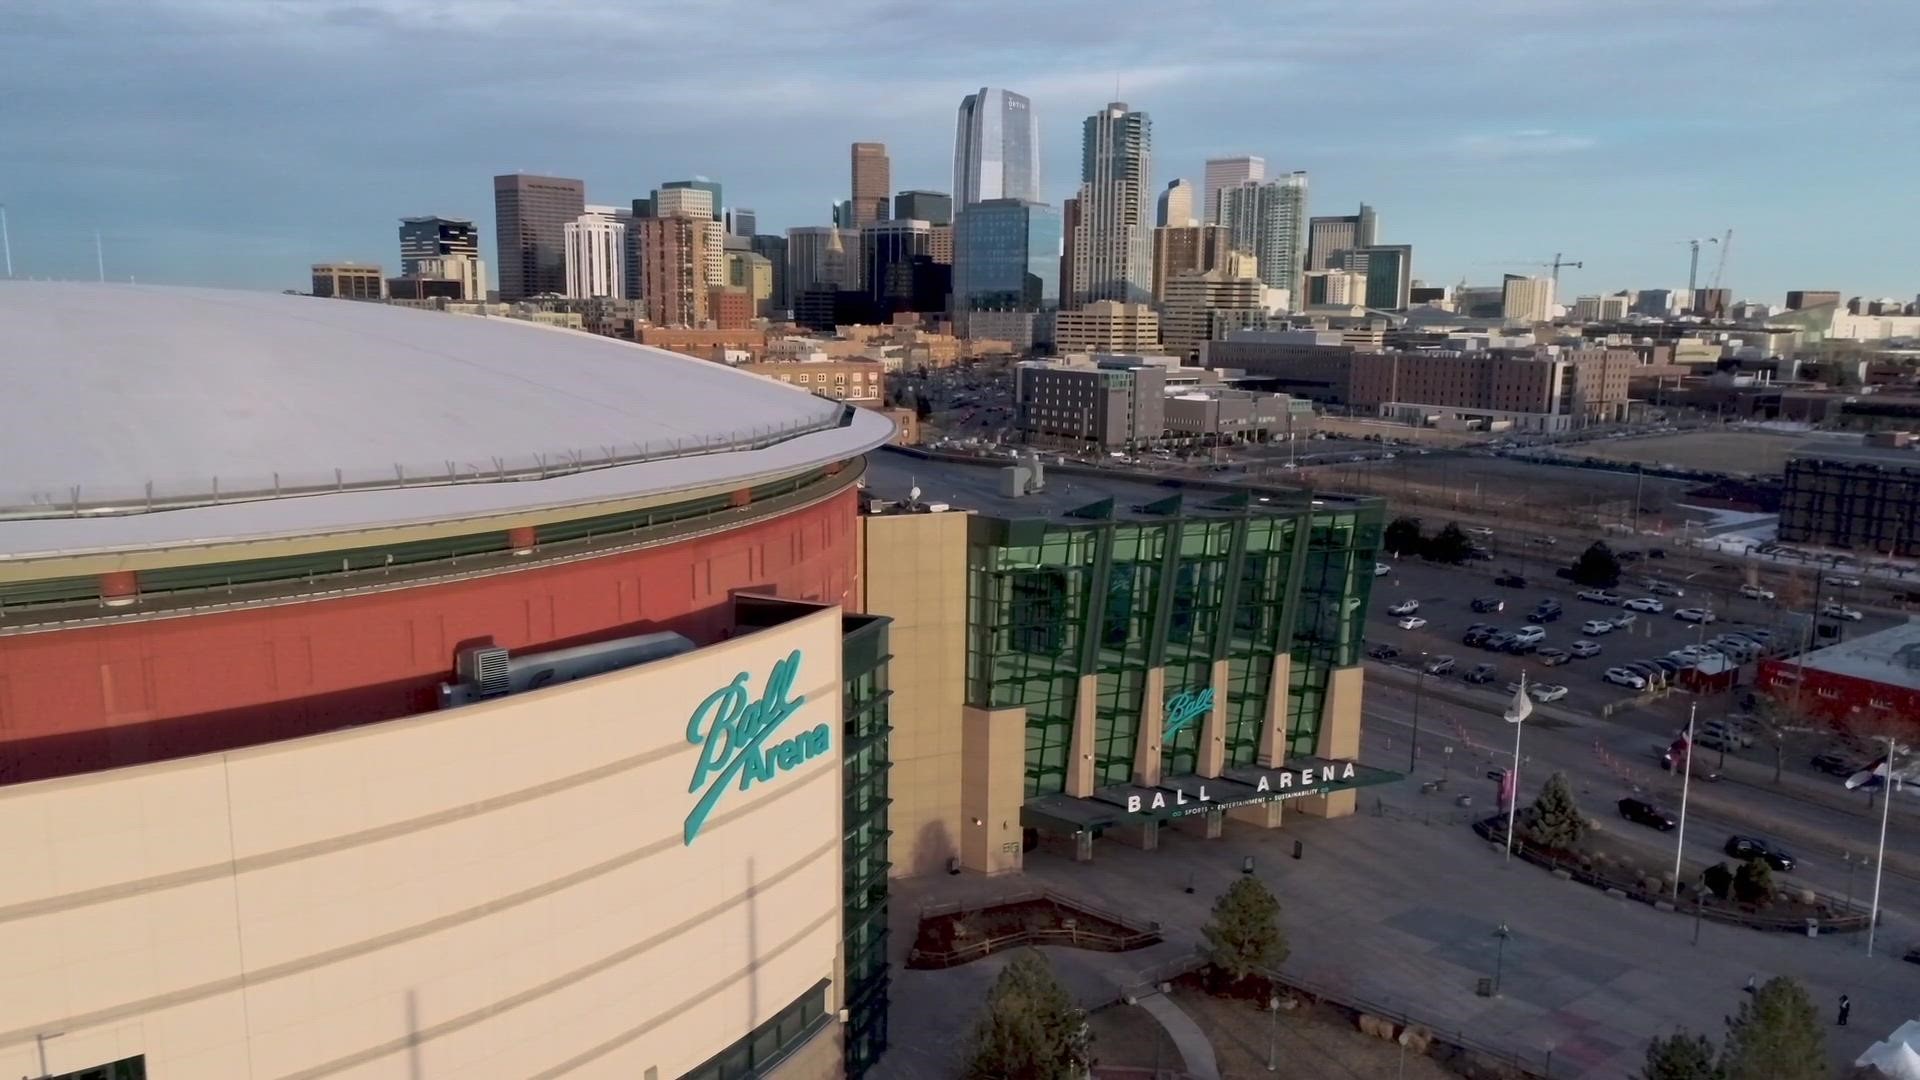 Ball Corporation and Kroenke Sports and Entertainment announced in October 2020 the downtown Denver entertainment venue Pepsi Center would be renamed Ball Arena.